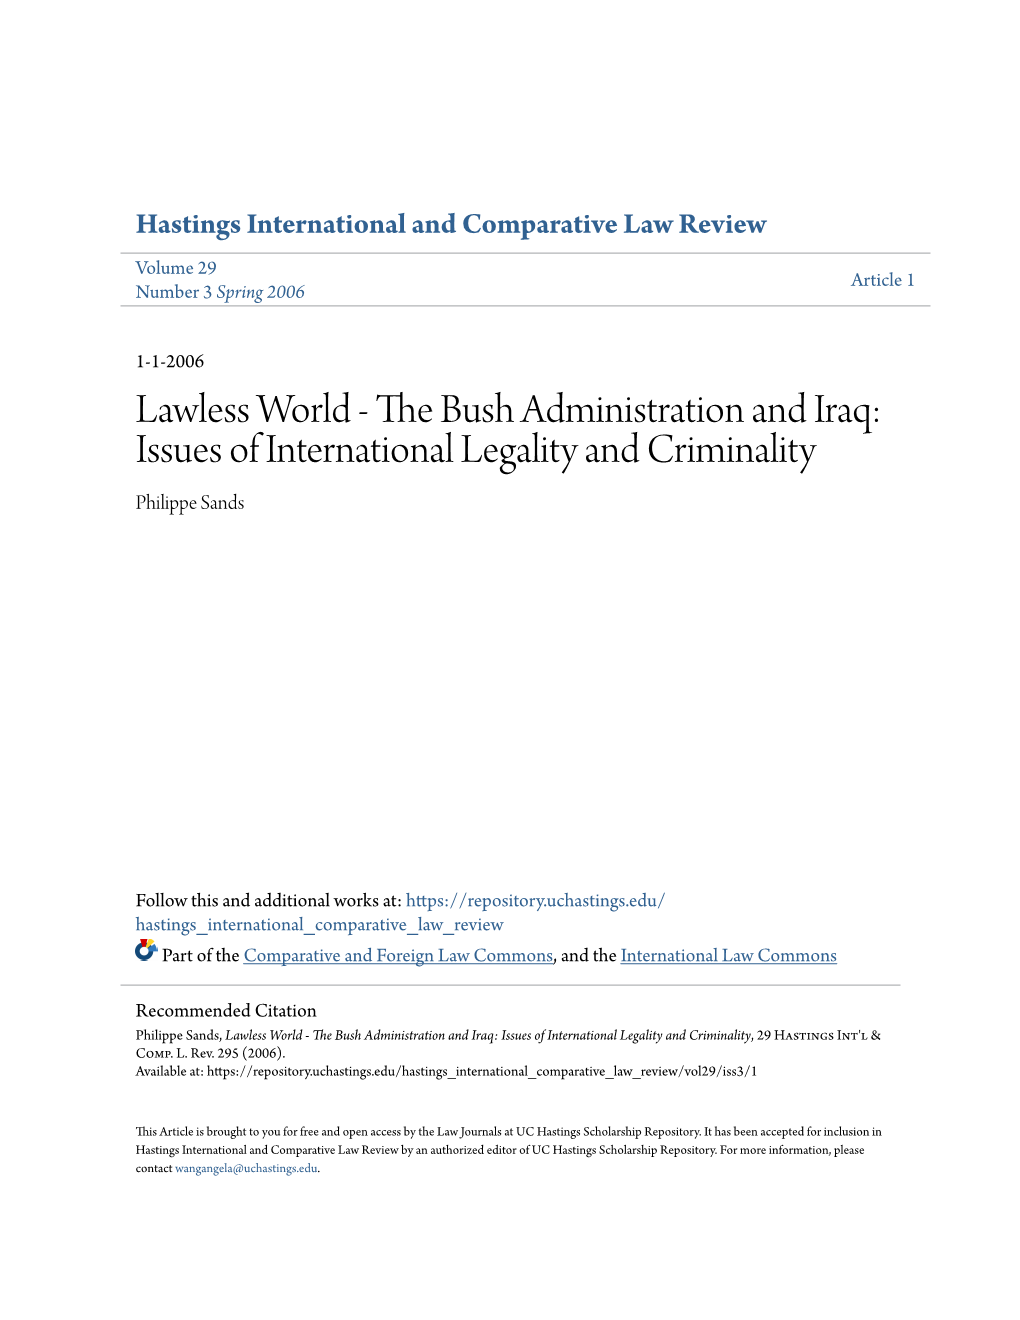 Lawless World - the Ub Sh Administration and Iraq: Issues of International Legality and Criminality Philippe Sands